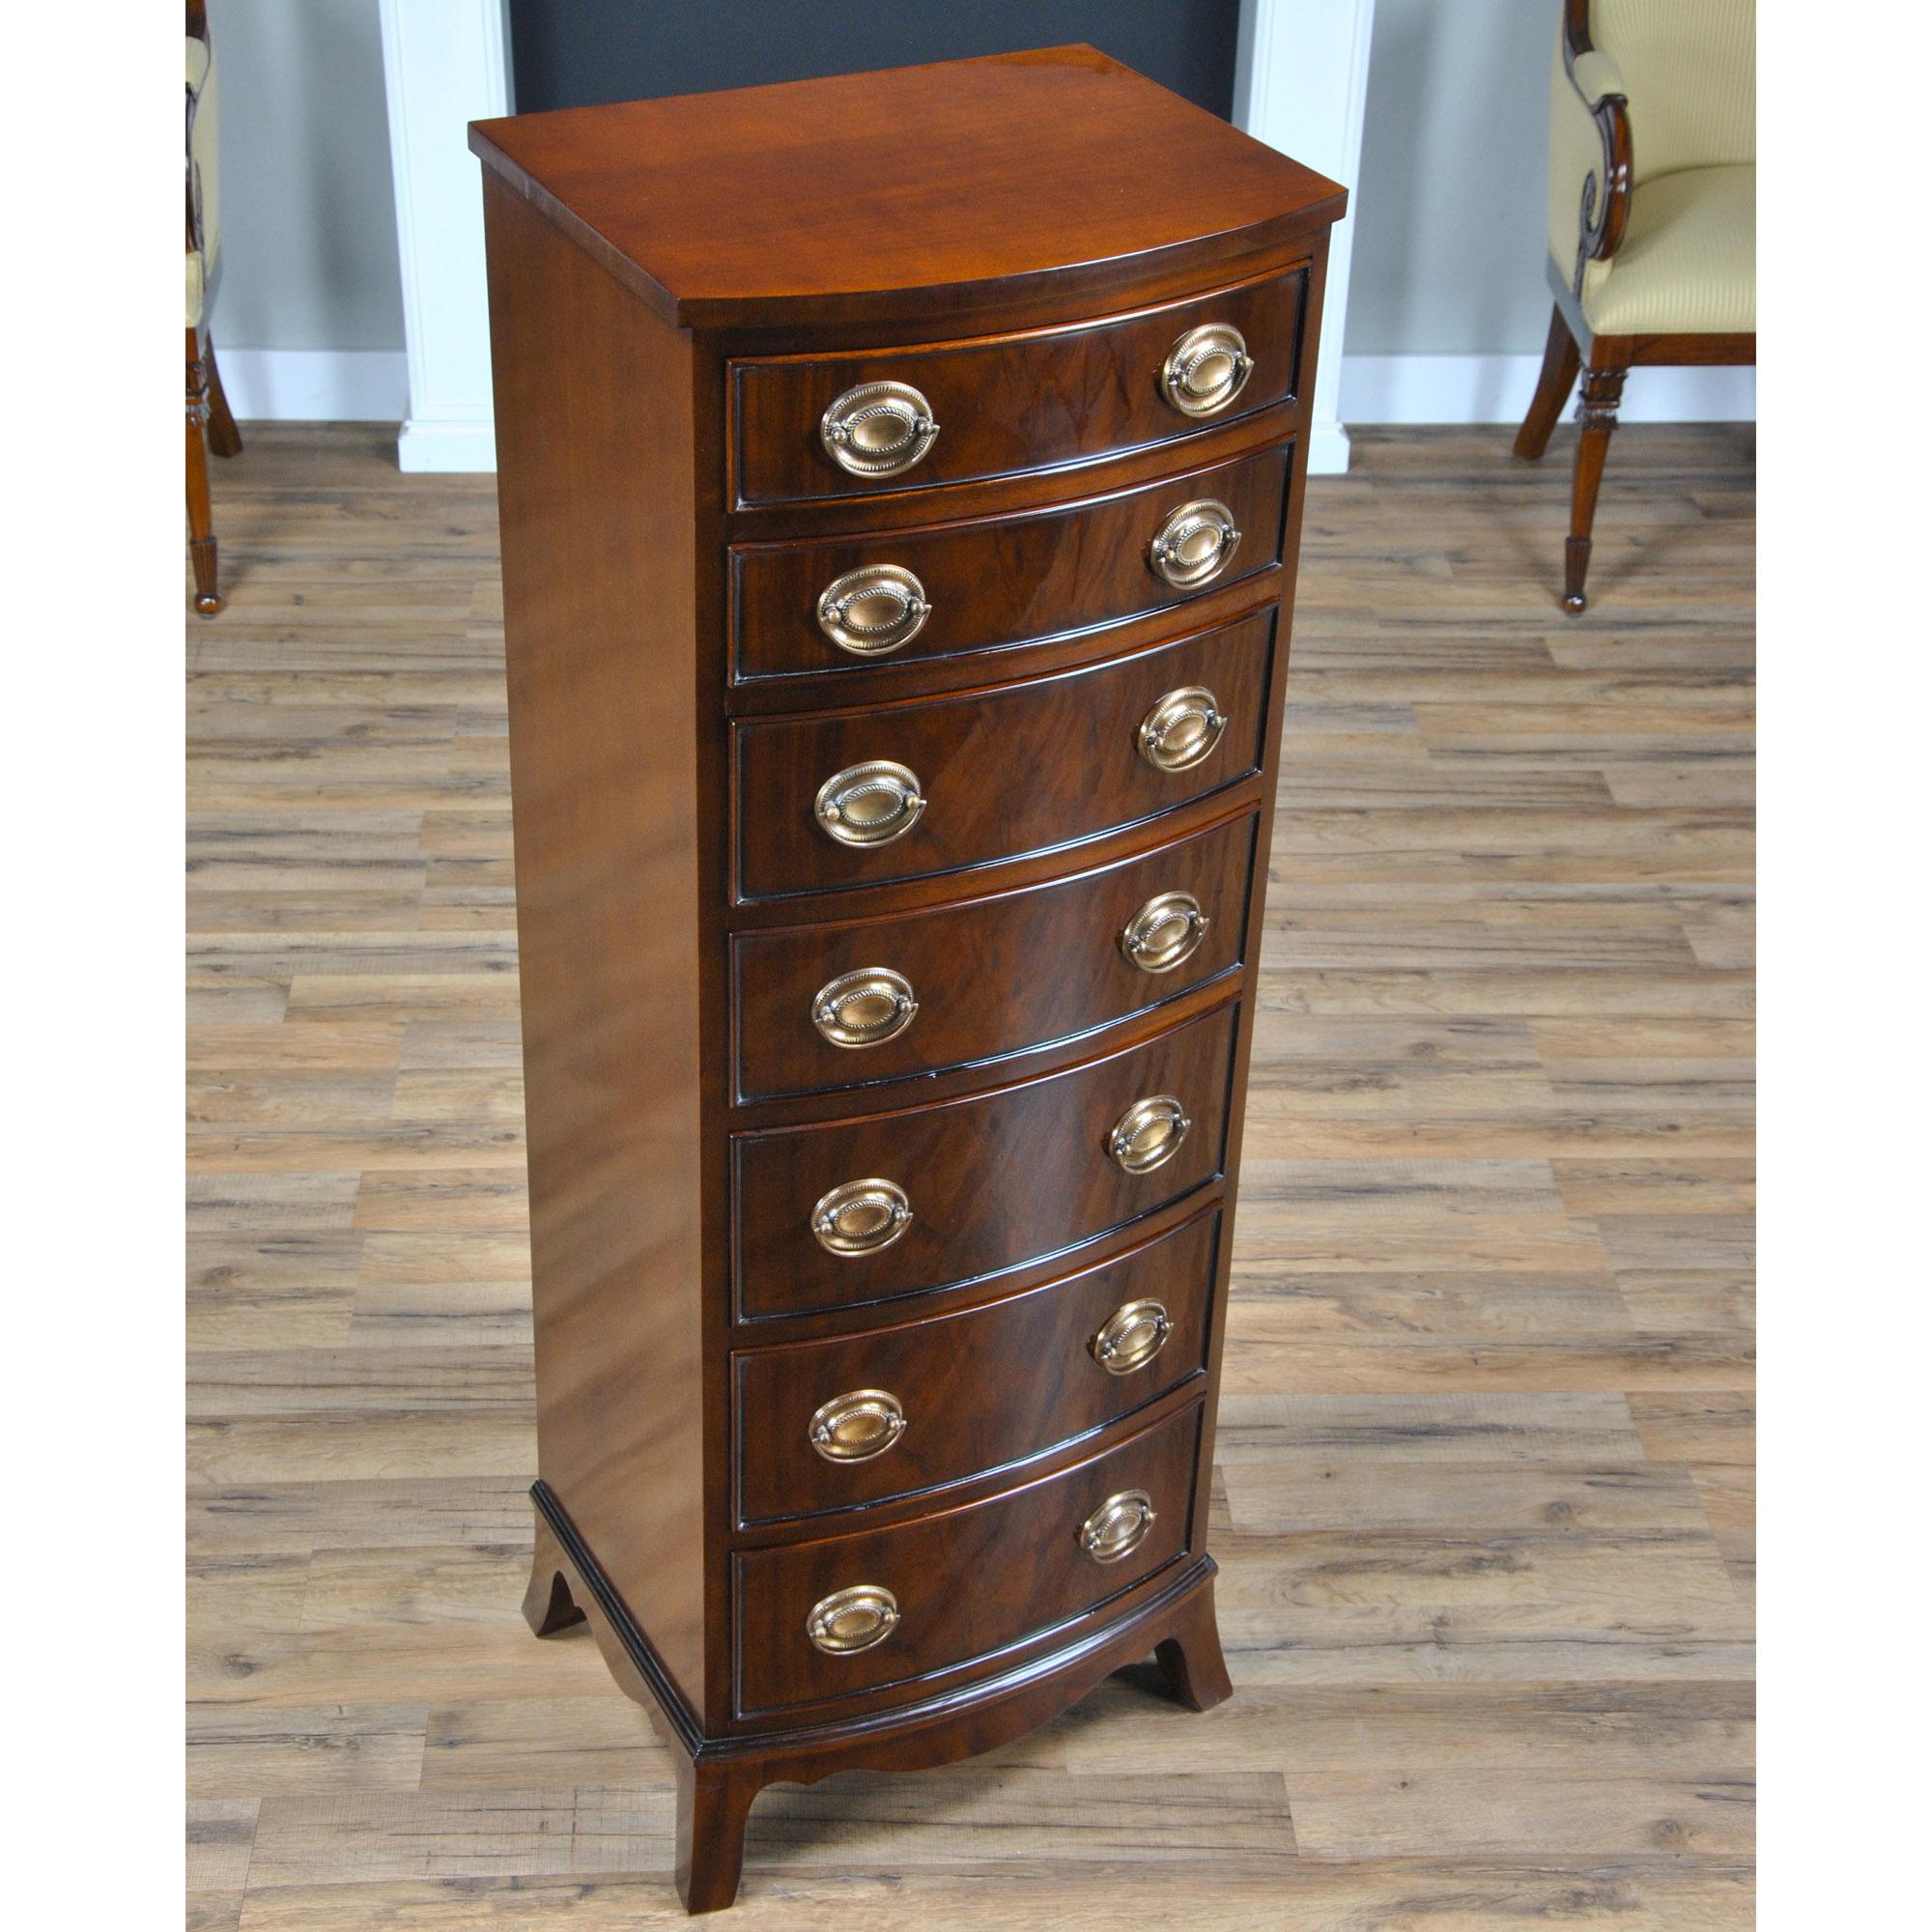 The beautifully crafted Mahogany Lingerie chest, a high quality piece of furniture from top to bottom. This tall chest was designed to store lingerie but it can hold any variety of items, all in a narrow space. Hard to find vertical storage, all on